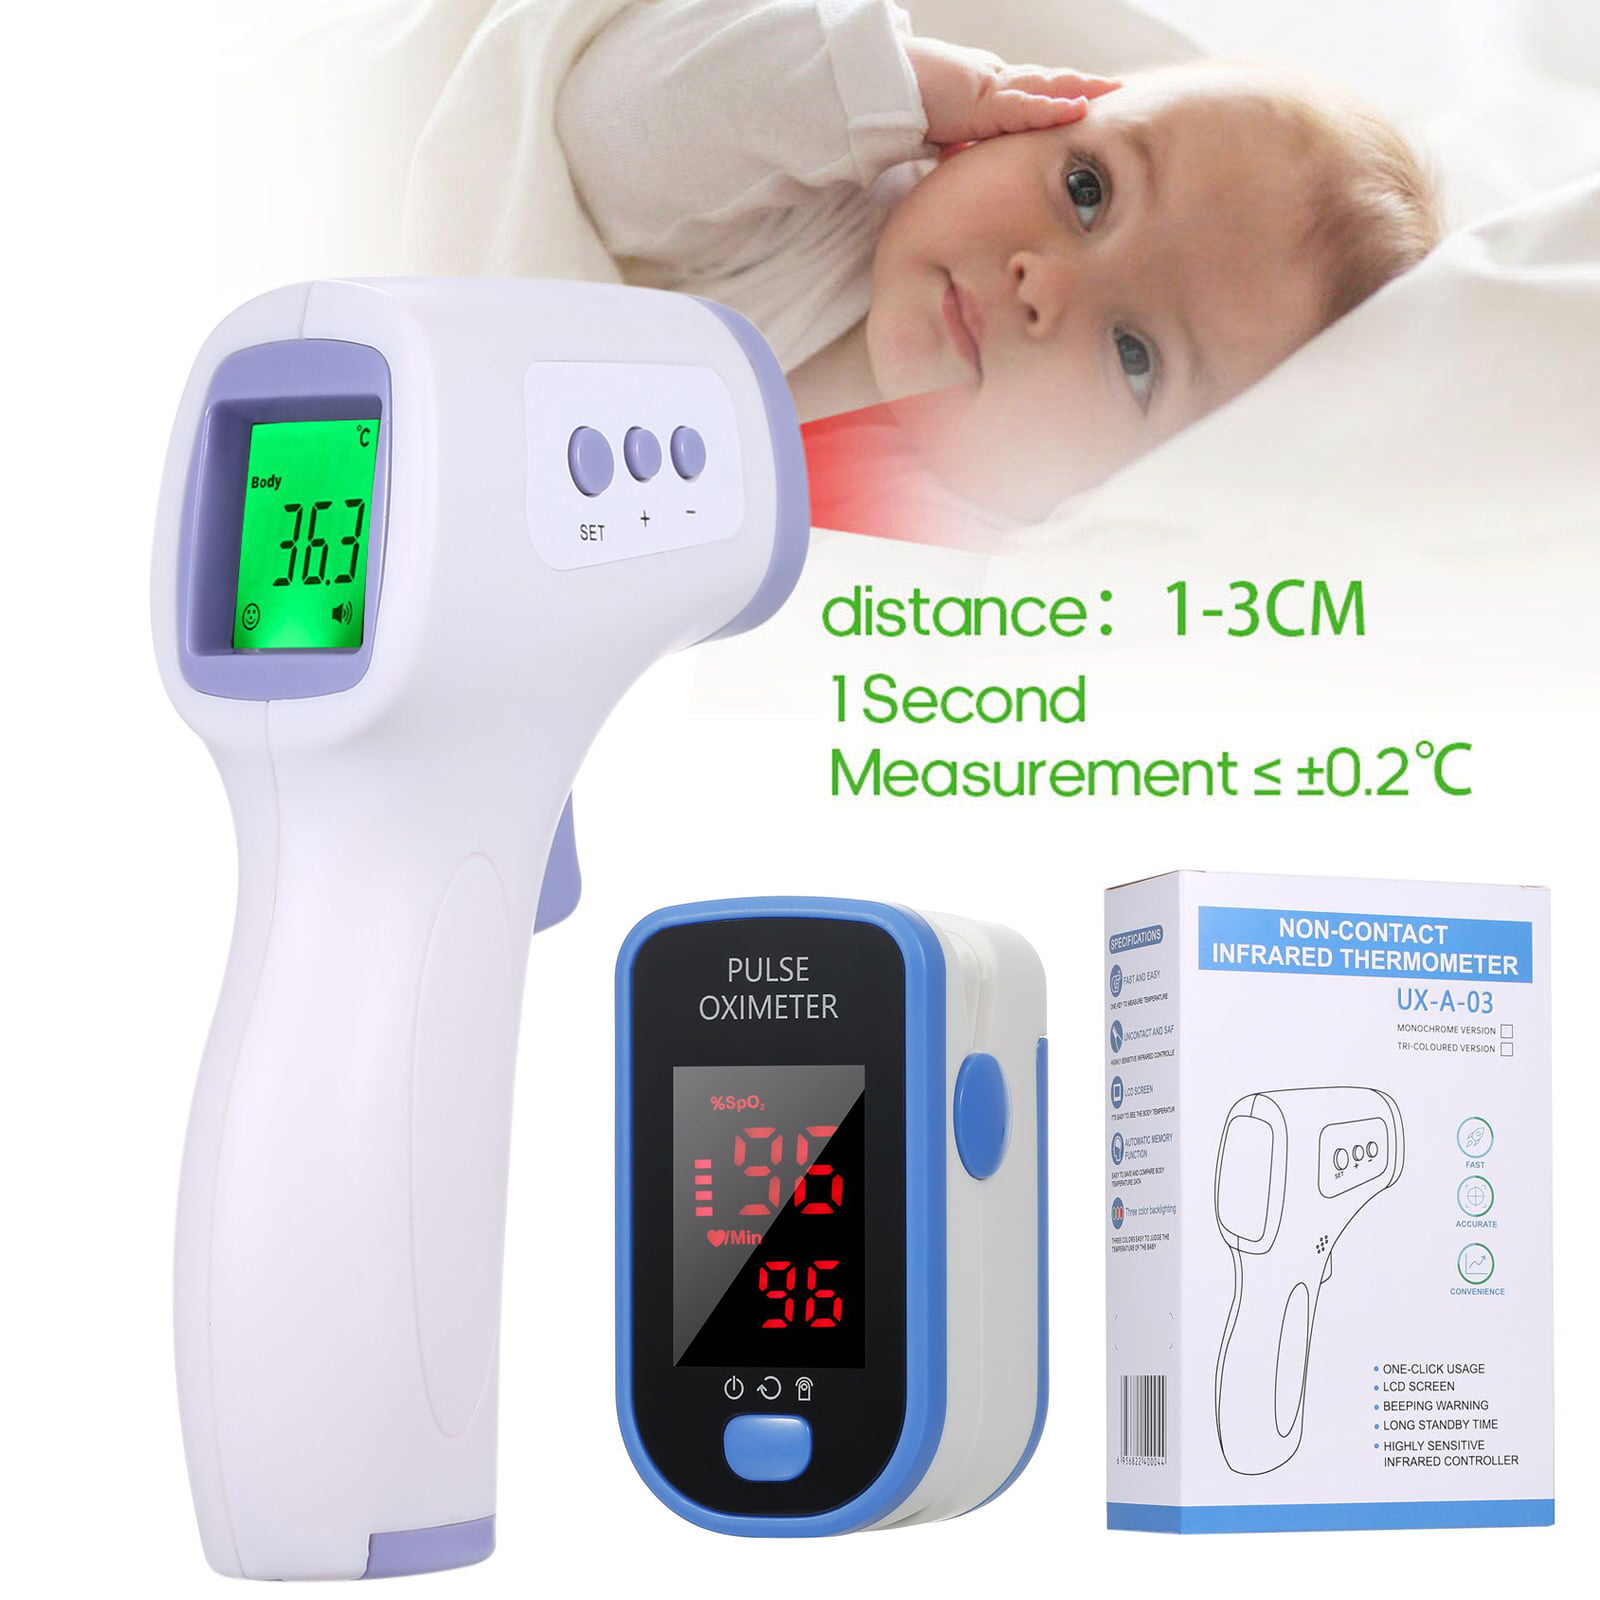 Infrared Thermometer Baby Temperature ， Portable Travel LCD Non-Contact IR Red Infrared Ray Electronic Thermometer Medical Health Care Measurement Meter Warning Alarm